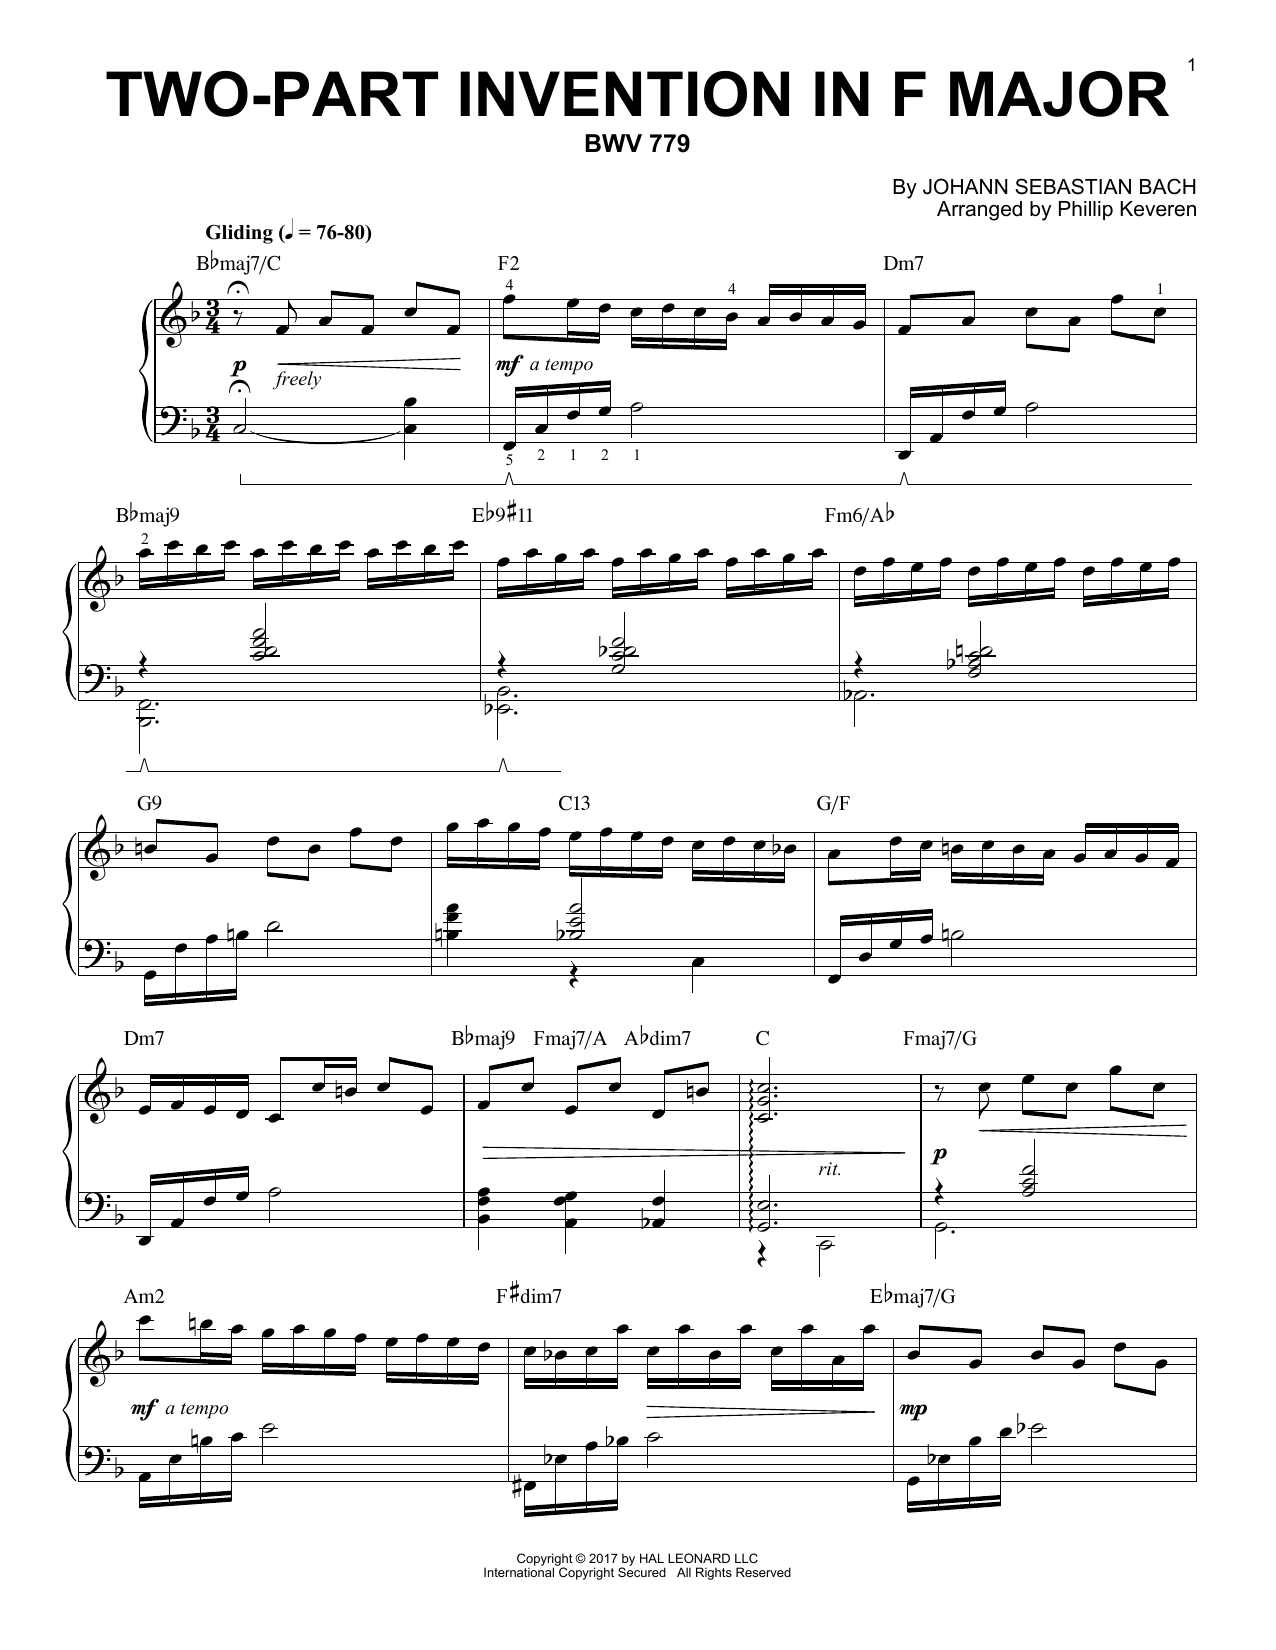 Download Phillip Keveren Two-Part Invention In F Major, BWV 779 Sheet Music